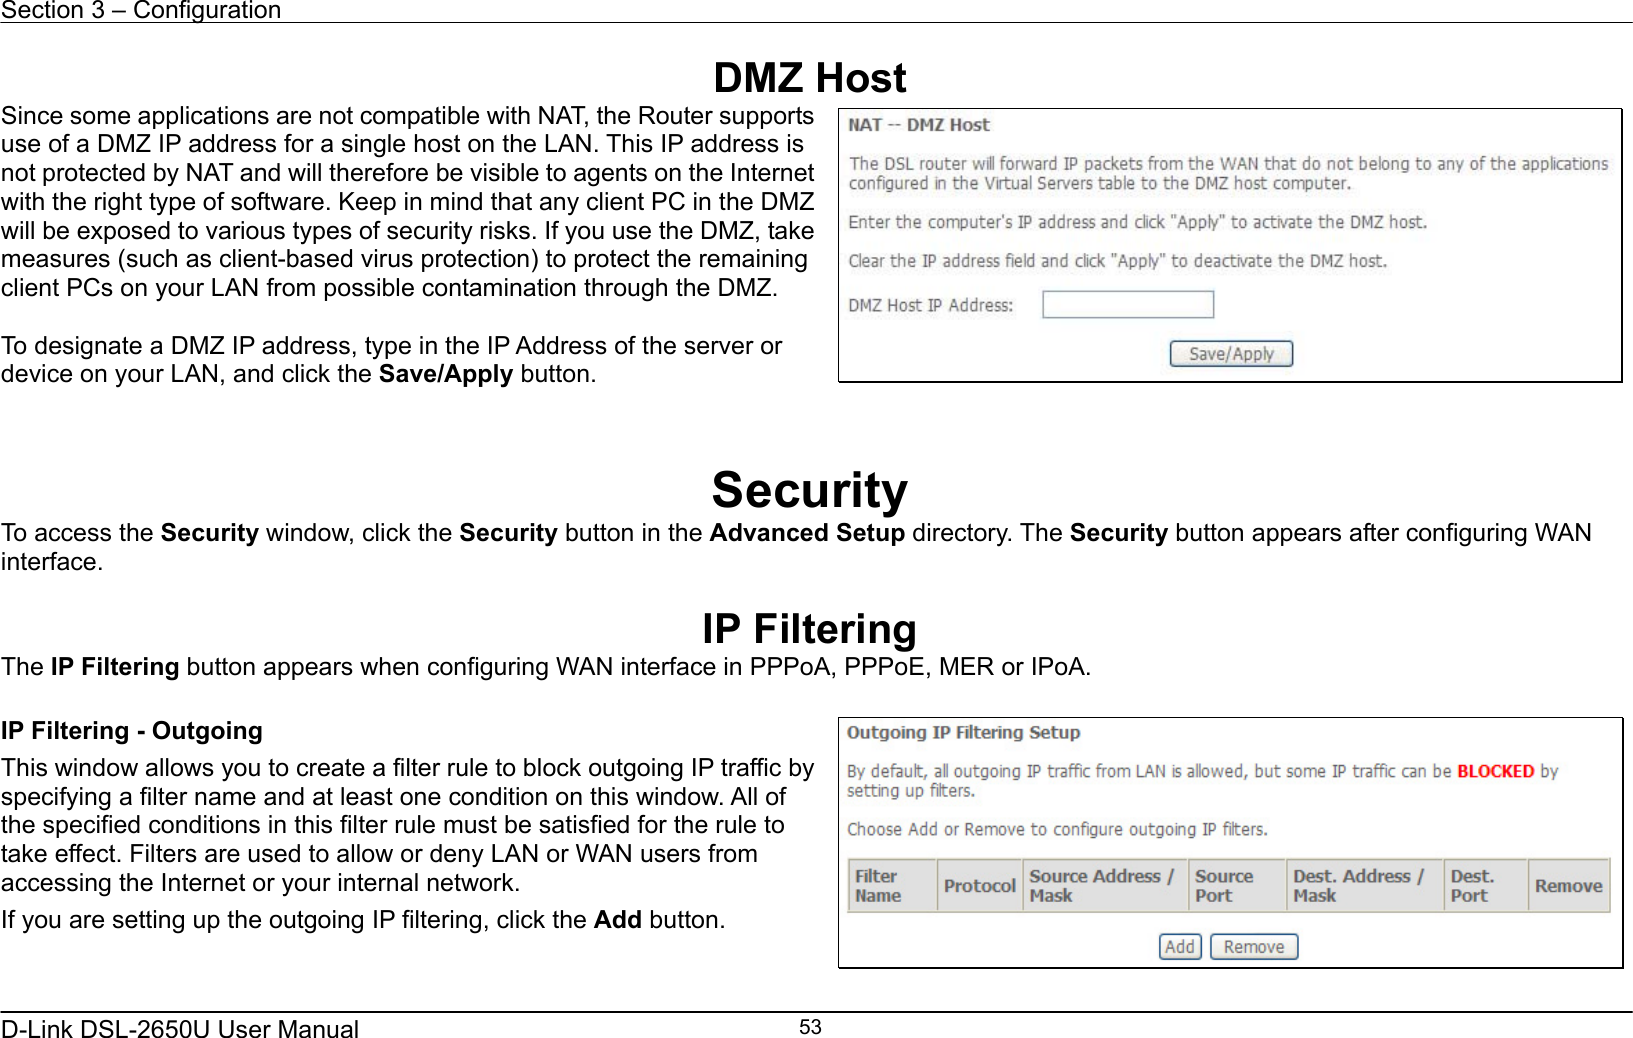 Section 3 – Configuration   D-Link DSL-2650U User Manual    53DMZ Host Since some applications are not compatible with NAT, the Router supports use of a DMZ IP address for a single host on the LAN. This IP address is not protected by NAT and will therefore be visible to agents on the Internet with the right type of software. Keep in mind that any client PC in the DMZ will be exposed to various types of security risks. If you use the DMZ, take measures (such as client-based virus protection) to protect the remaining client PCs on your LAN from possible contamination through the DMZ.  To designate a DMZ IP address, type in the IP Address of the server or device on your LAN, and click the Save/Apply button.    Security To access the Security window, click the Security button in the Advanced Setup directory. The Security button appears after configuring WAN interface.  IP Filtering The IP Filtering button appears when configuring WAN interface in PPPoA, PPPoE, MER or IPoA.  IP Filtering - Outgoing This window allows you to create a filter rule to block outgoing IP traffic by specifying a filter name and at least one condition on this window. All of the specified conditions in this filter rule must be satisfied for the rule to take effect. Filters are used to allow or deny LAN or WAN users from accessing the Internet or your internal network. If you are setting up the outgoing IP filtering, click the Add button.       